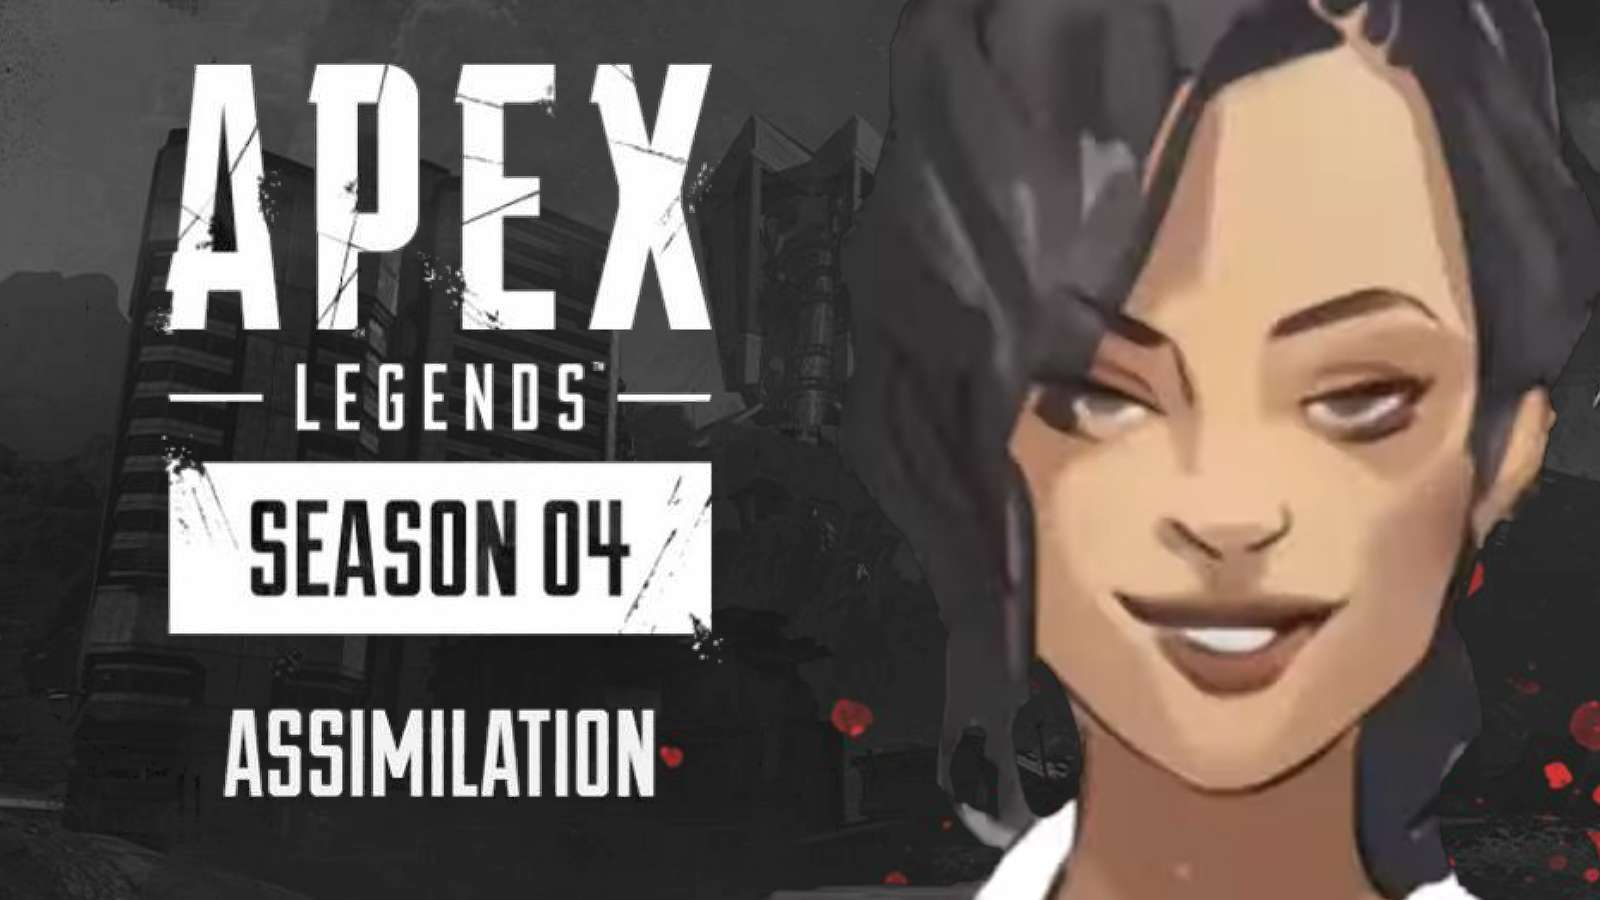 animated face of Rosie on black background with apex legends season 4 logo